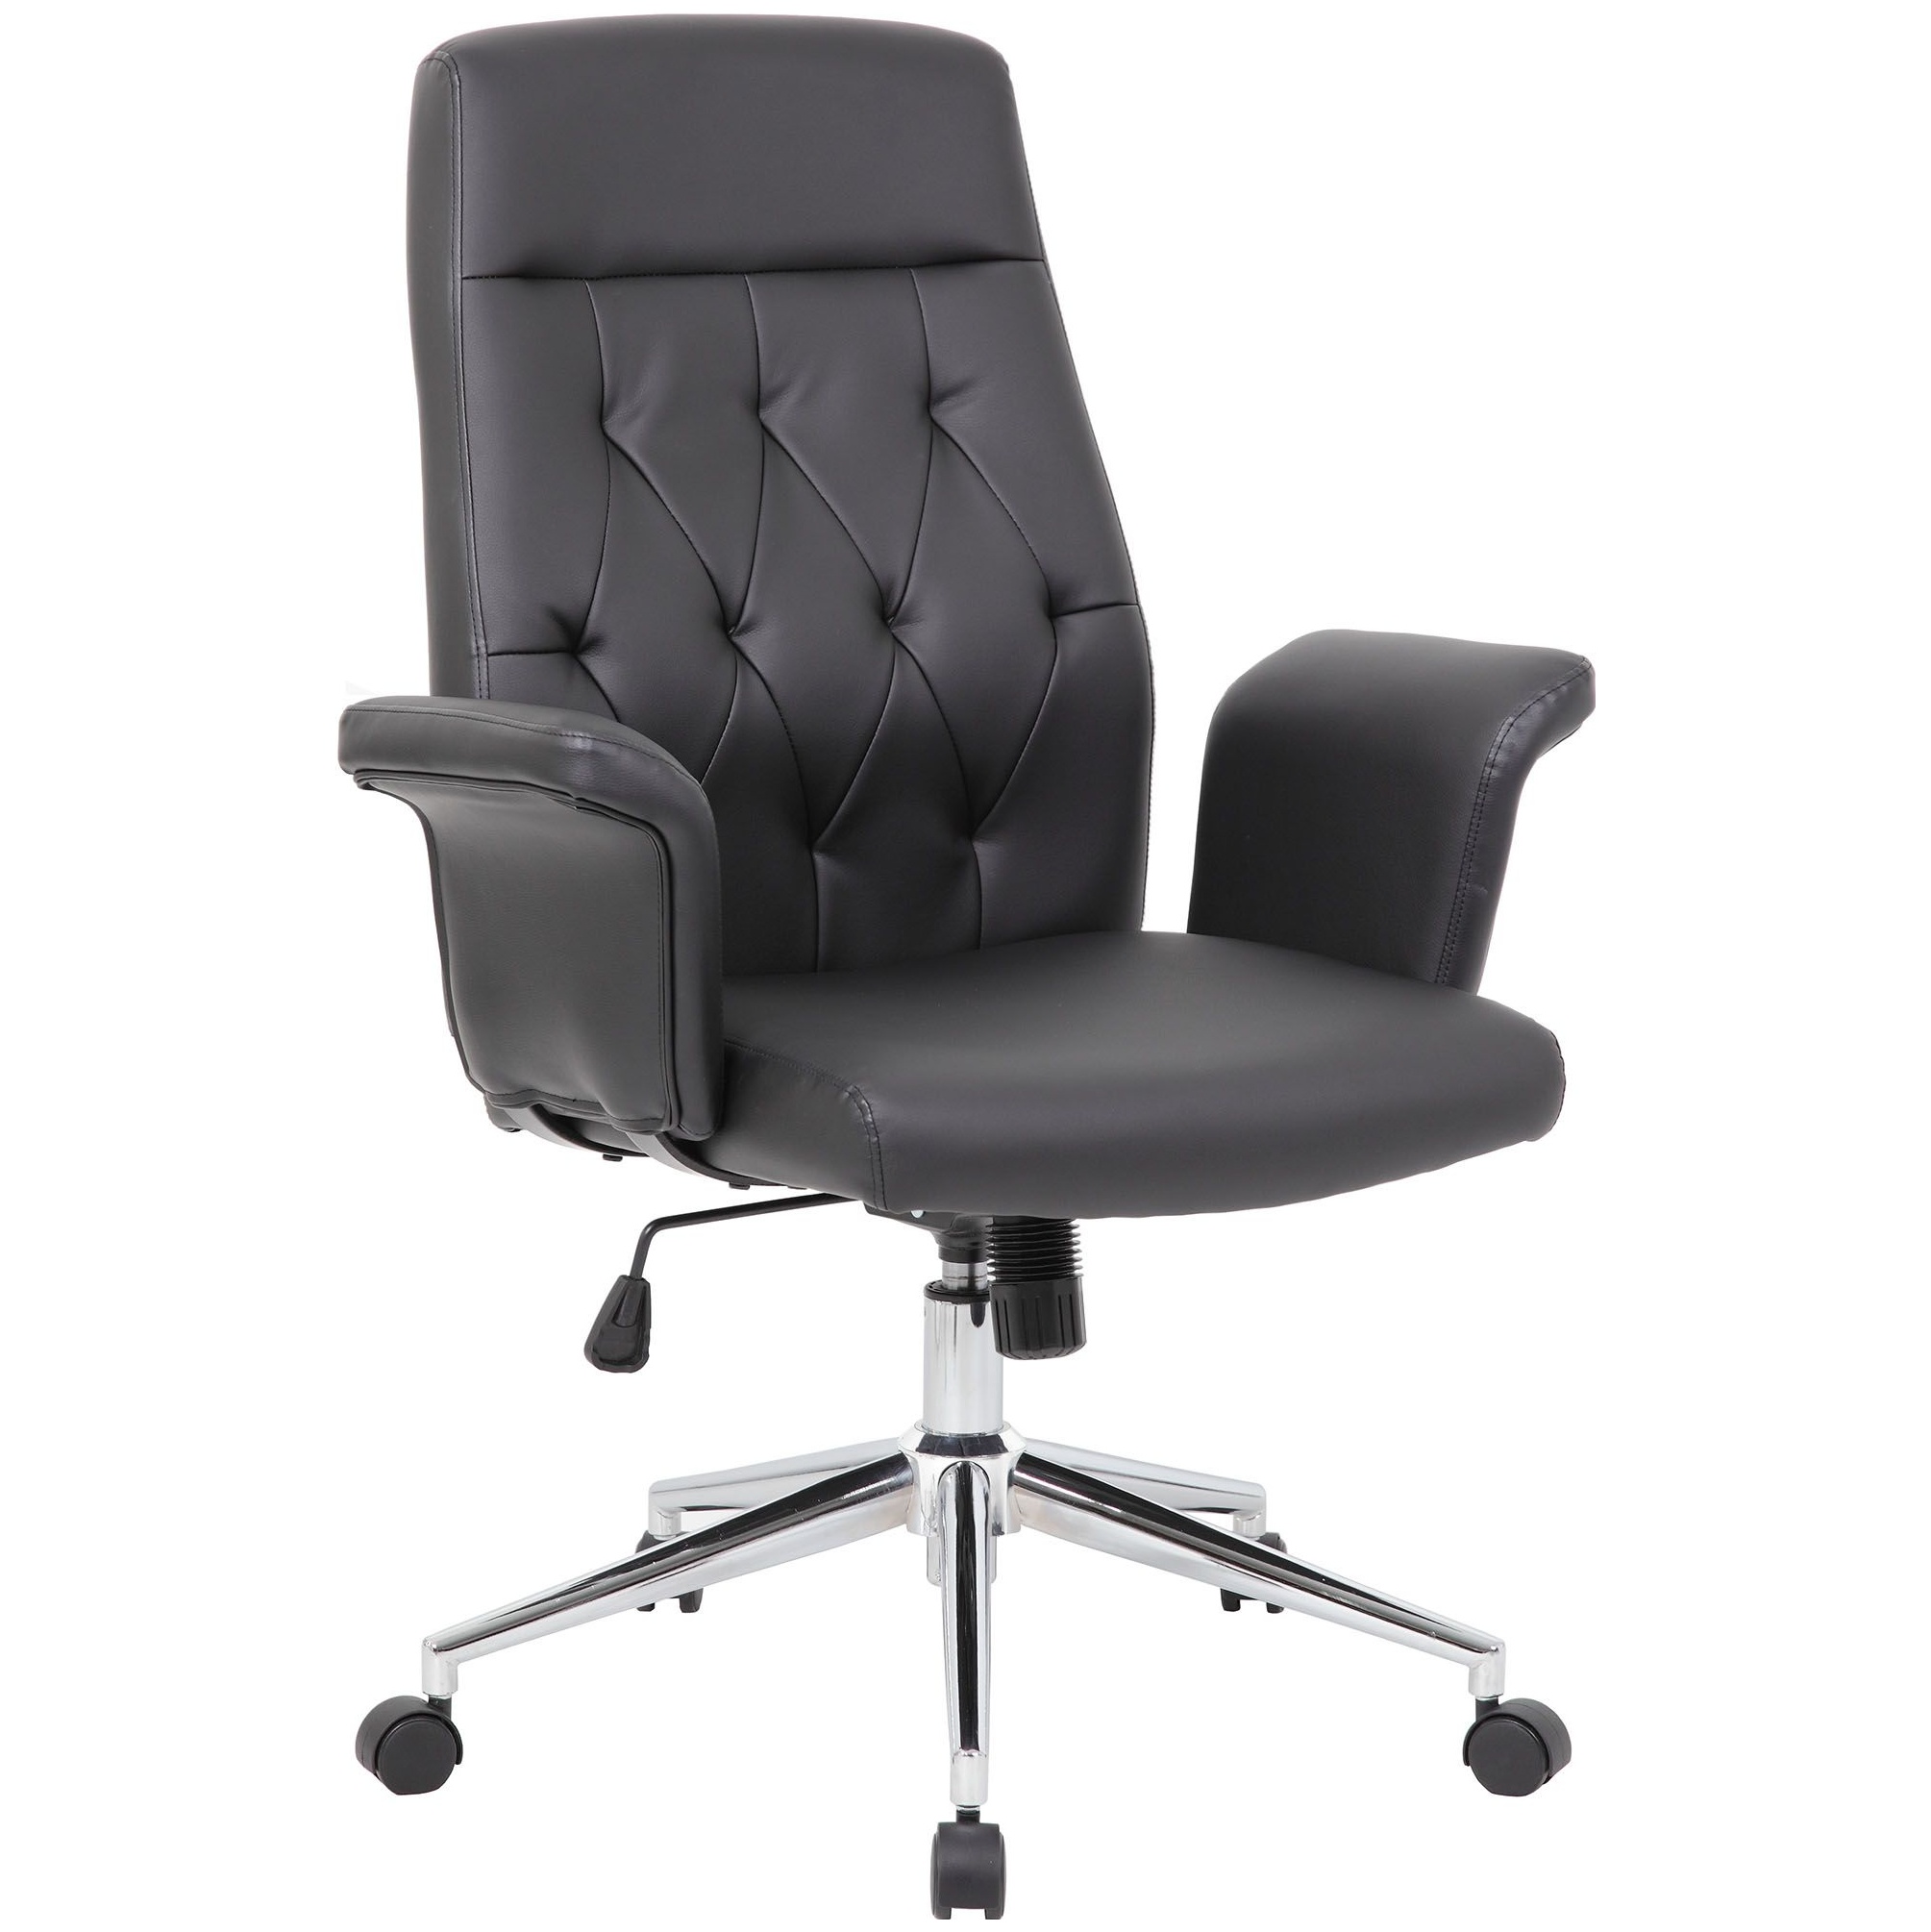 Retro Bonded Leather Office Chair Executive Office Chairs